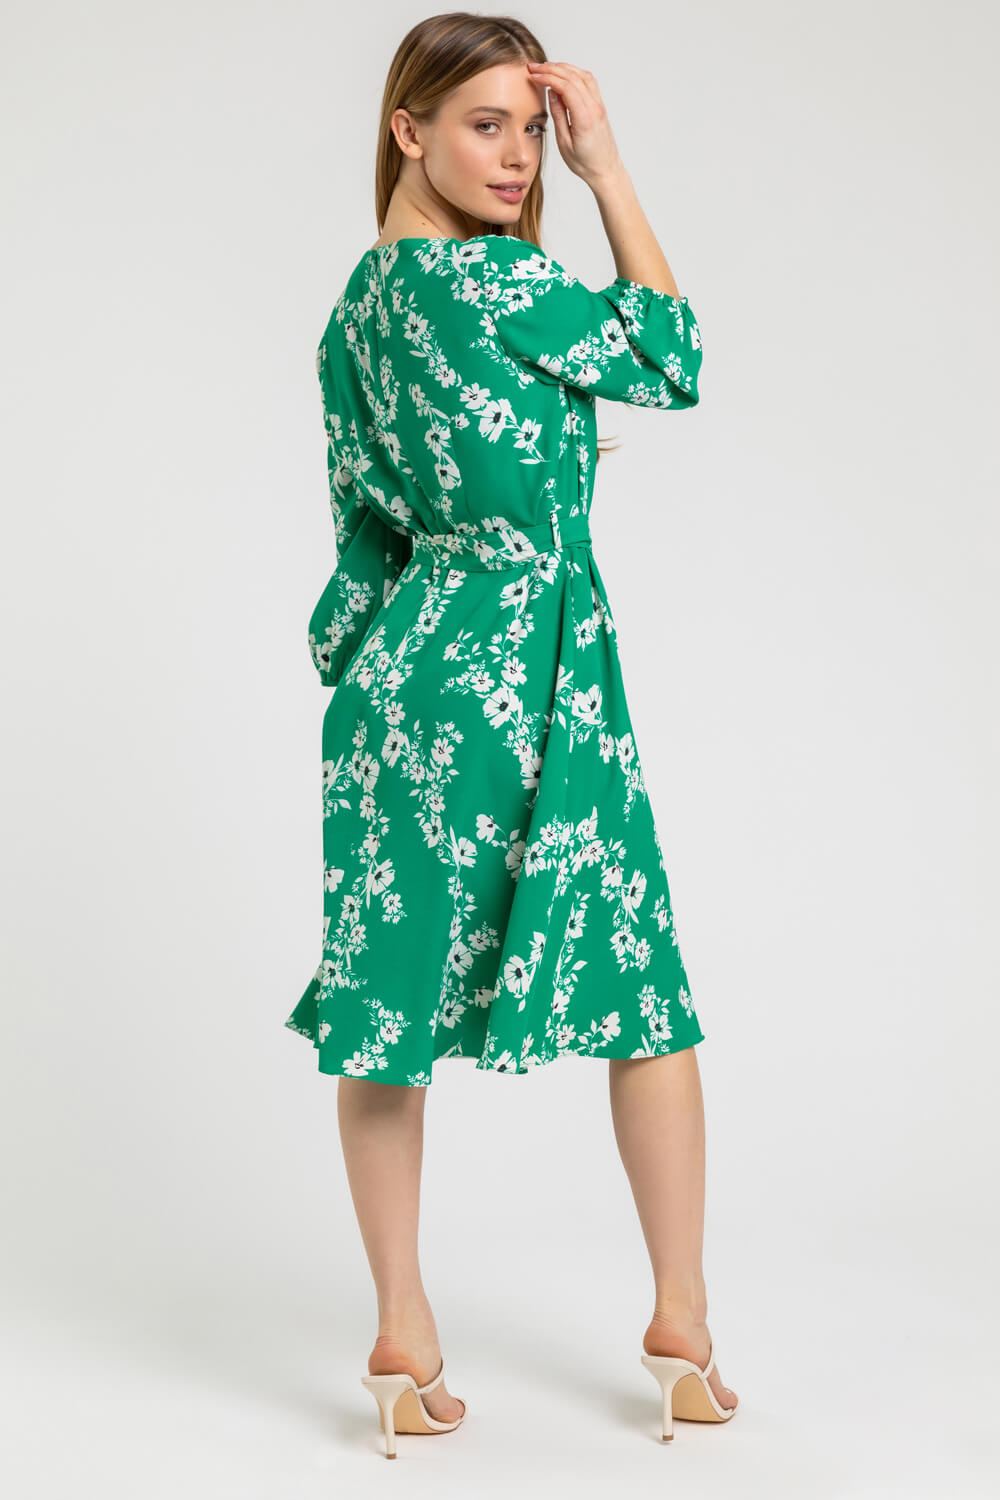 Green Petite Floral Fit & Flare Dress, Image 2 of 4